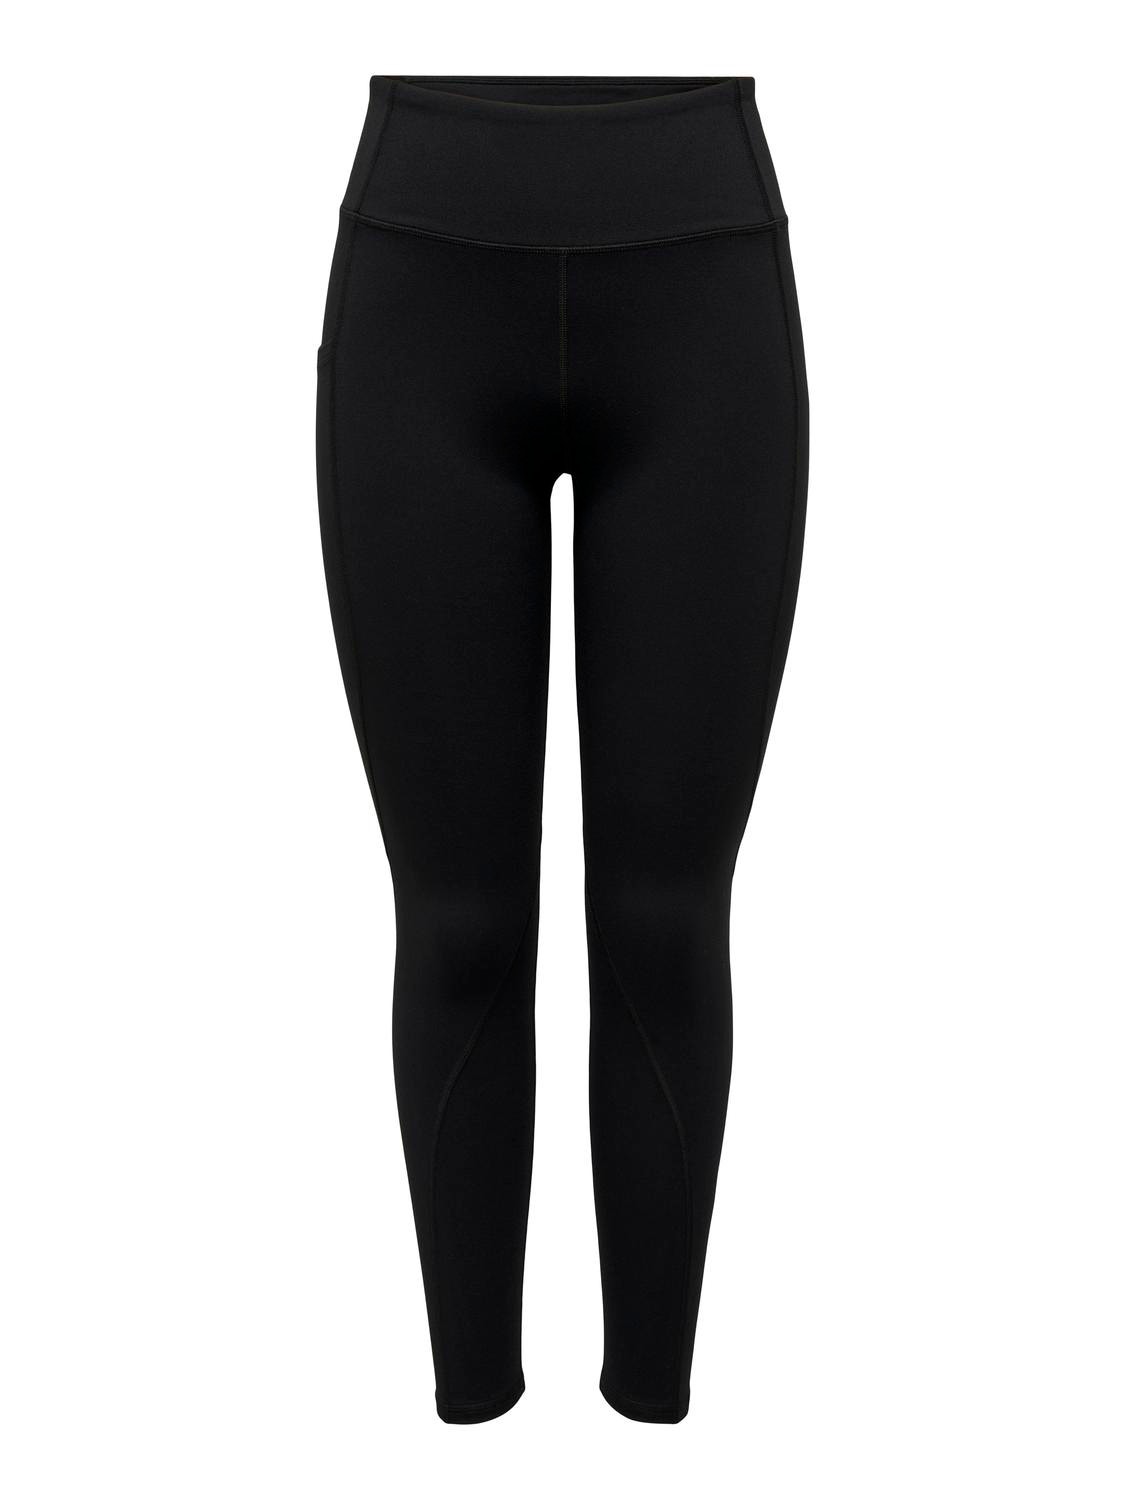 ONLY Warm training tights -Black - 15310593